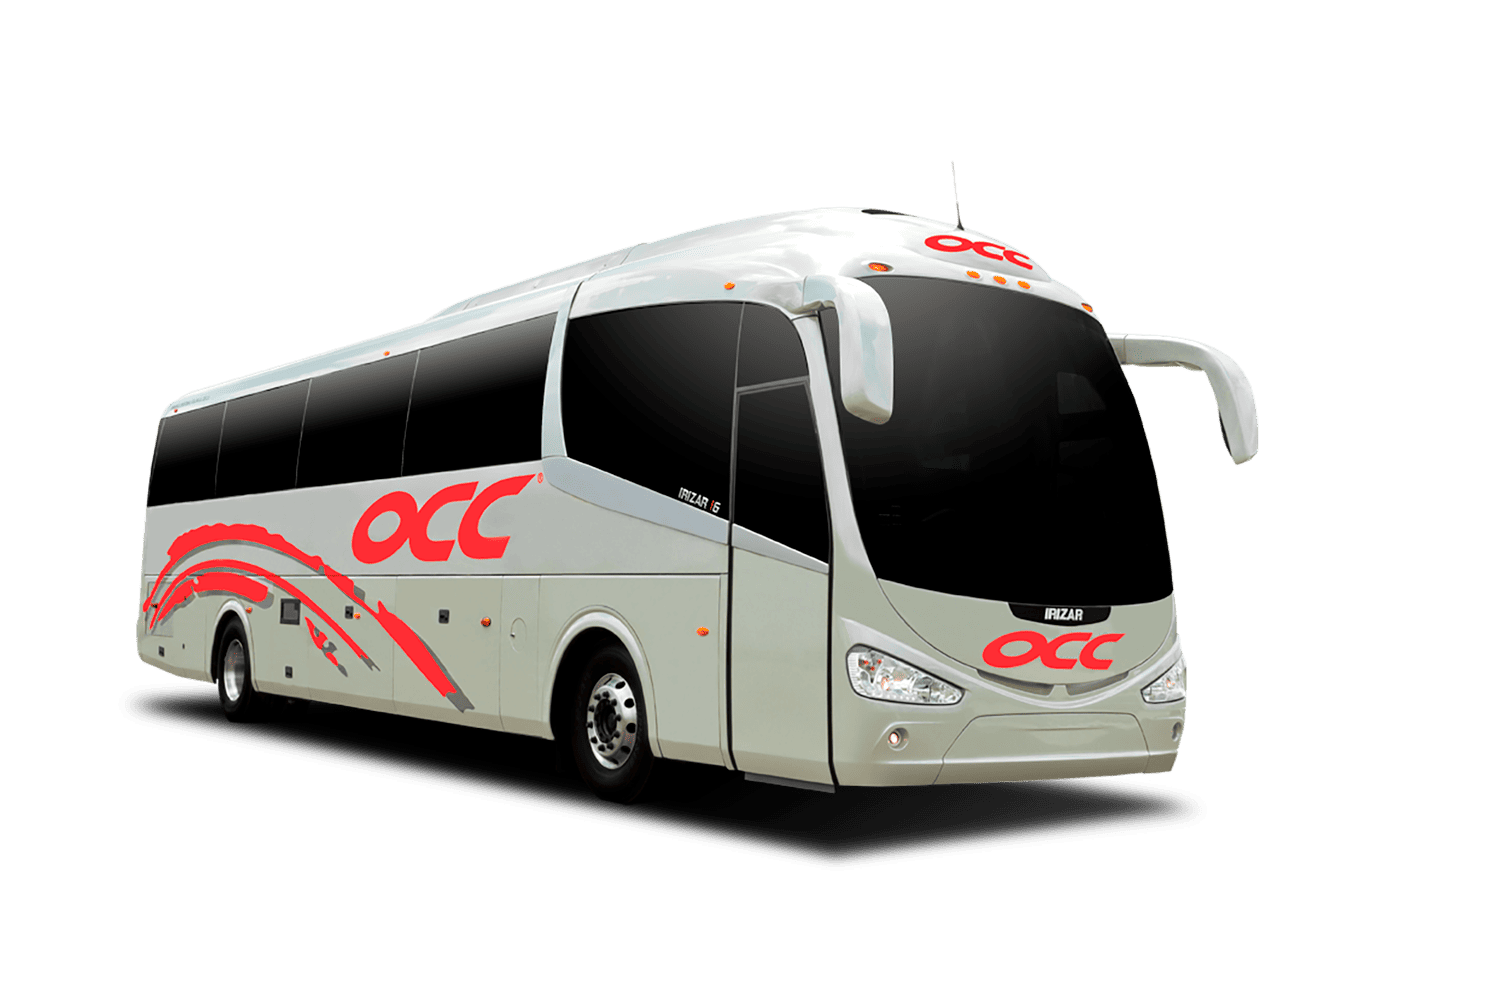 How To Get From Palenque to Playa del Carmen By Bus - All Possible Ways, cheapest way from Palenque to Playa del Carmen, Palenque to Playa del Carmen, ado bus from Palenque to Playa del Carmen, occ bus from Palenque to Playa del Carmen, AU autobuses unidos from Palenque to Playa del Carmen, shared van from Palenque to Playa del Carmen, Colectivo from Palenque to Playa del Carmen, Uber from Palenque to Playa del Carmen, taxi from Palenque to Playa del Carmen